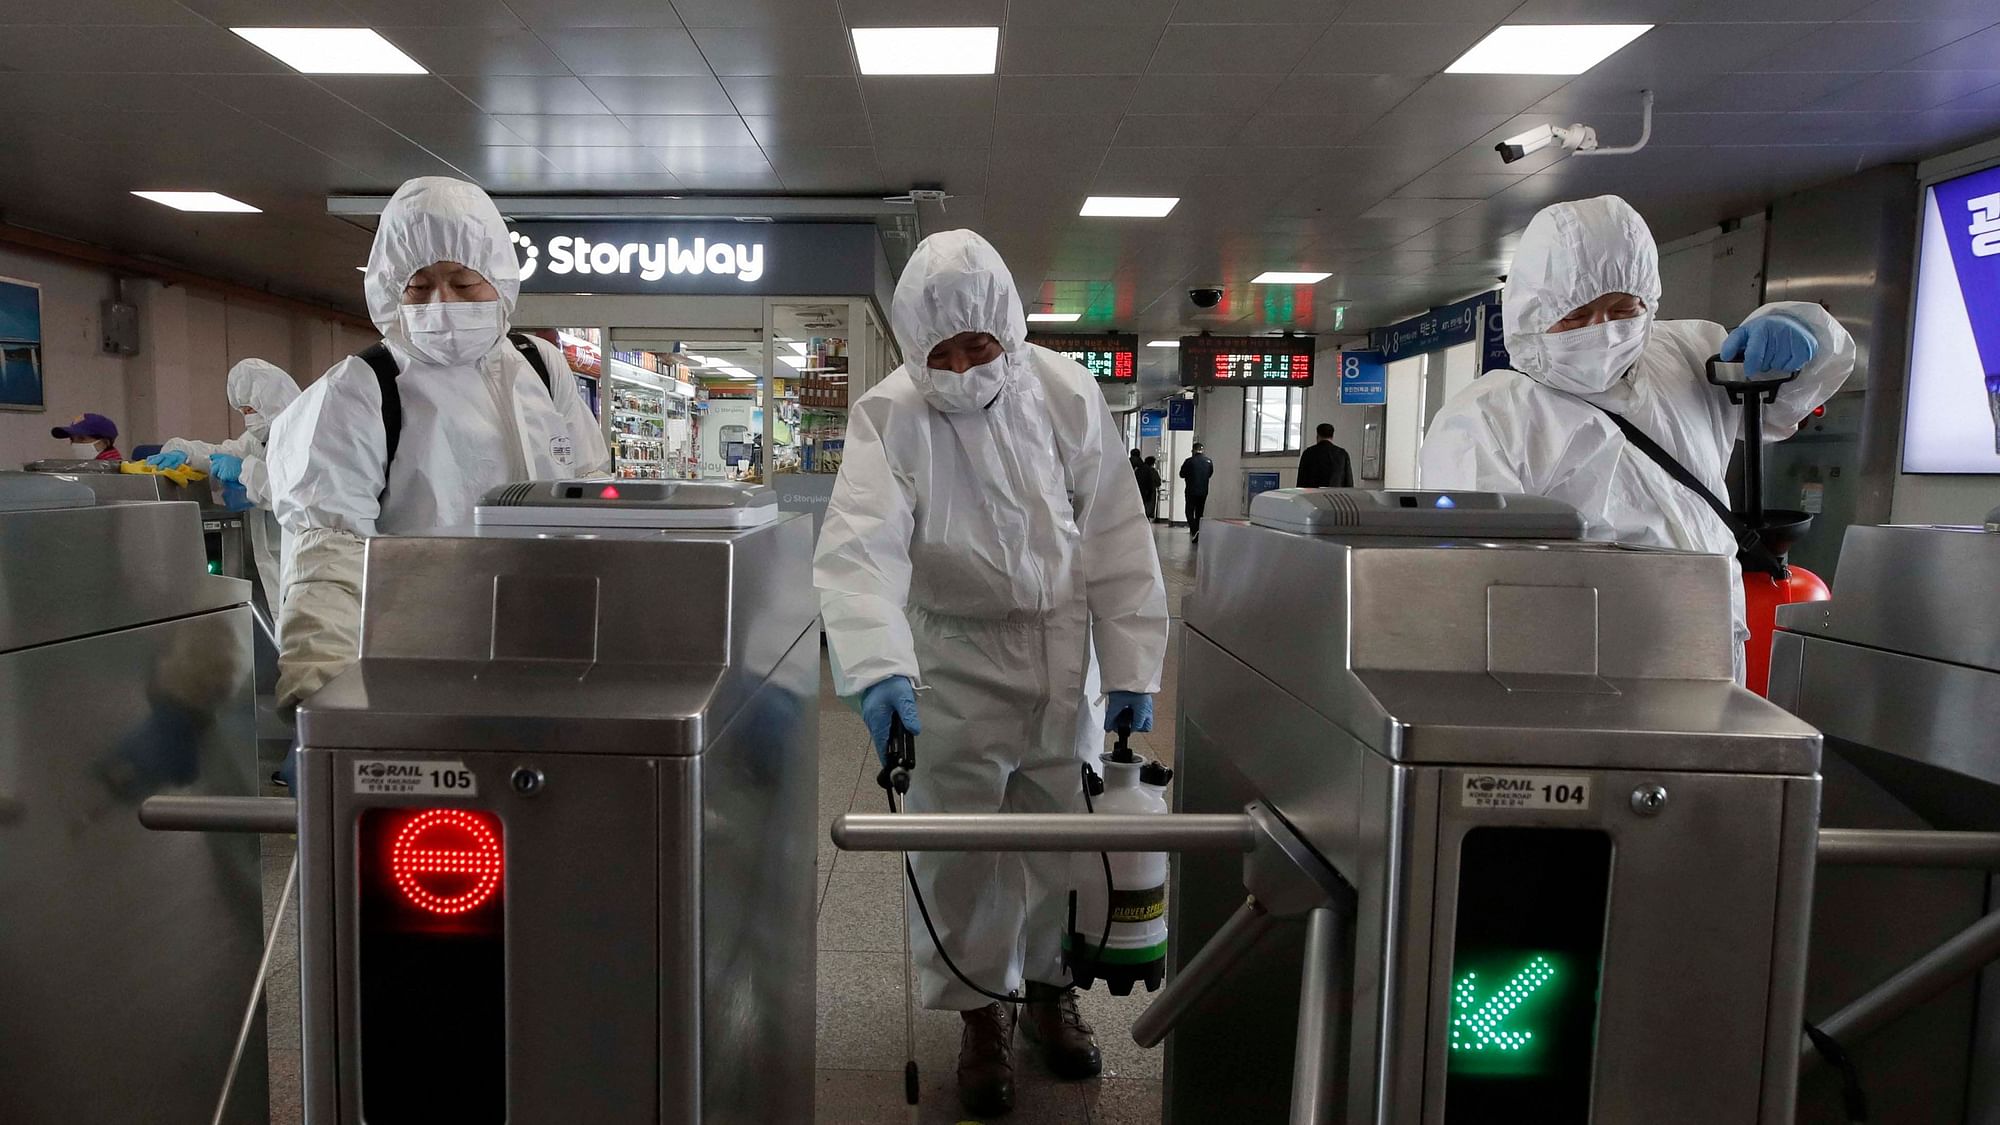 Workers wearing protective gears disinfect as a precaution against the new coronavirus at the subway station in Seoul, South Korea, Friday, March 13, 2020.